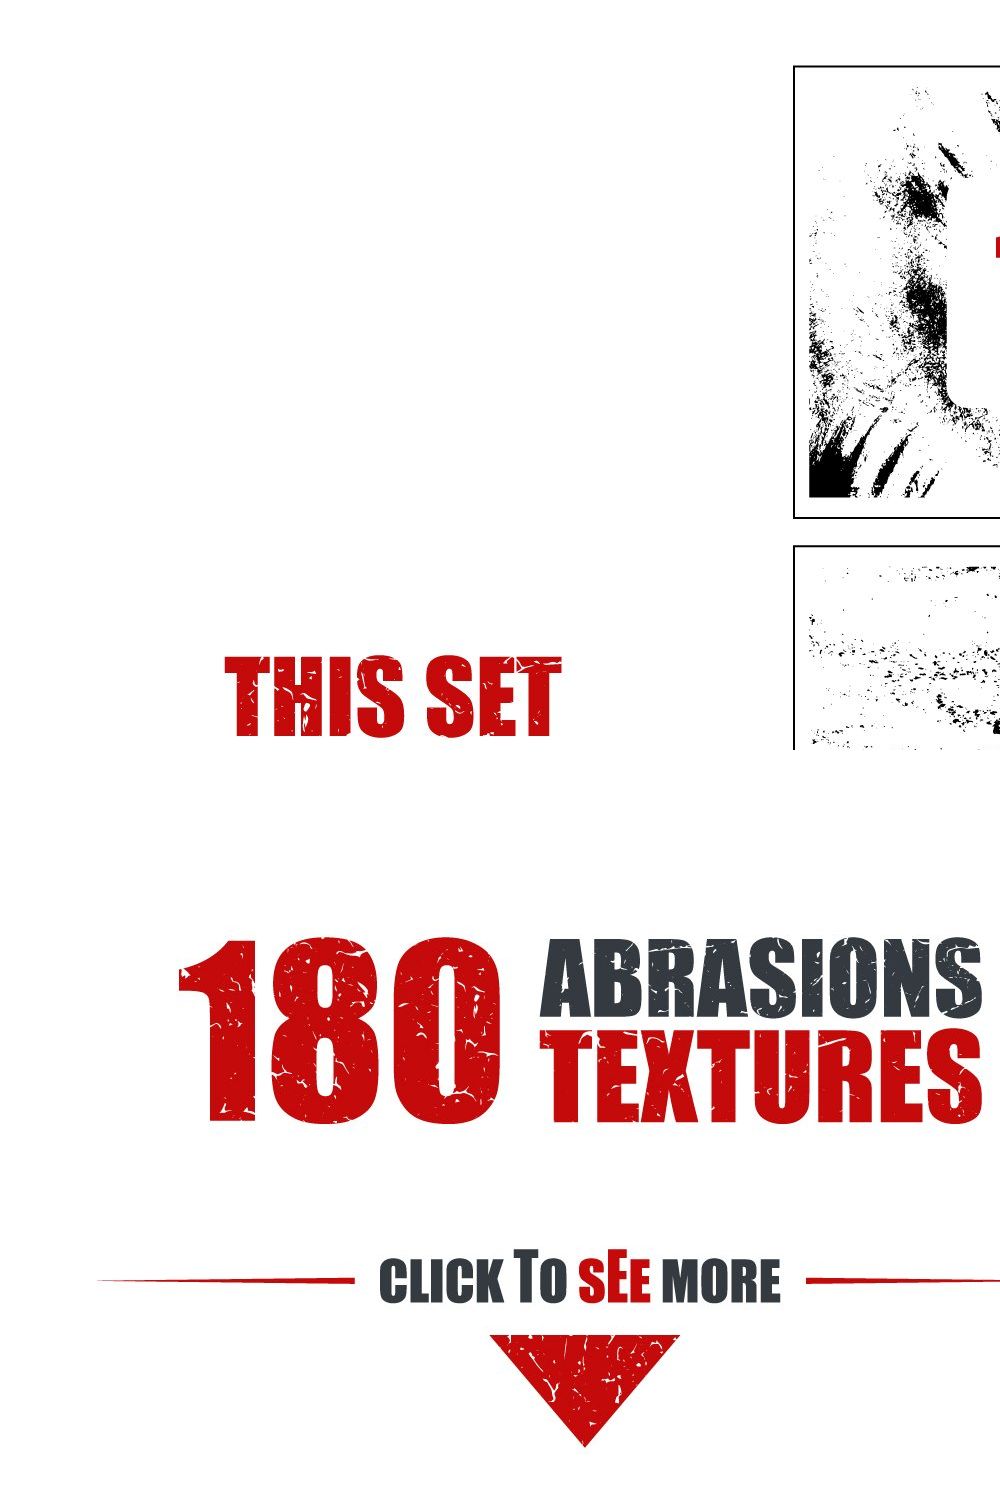 180 Abrasions Textures pinterest preview image.